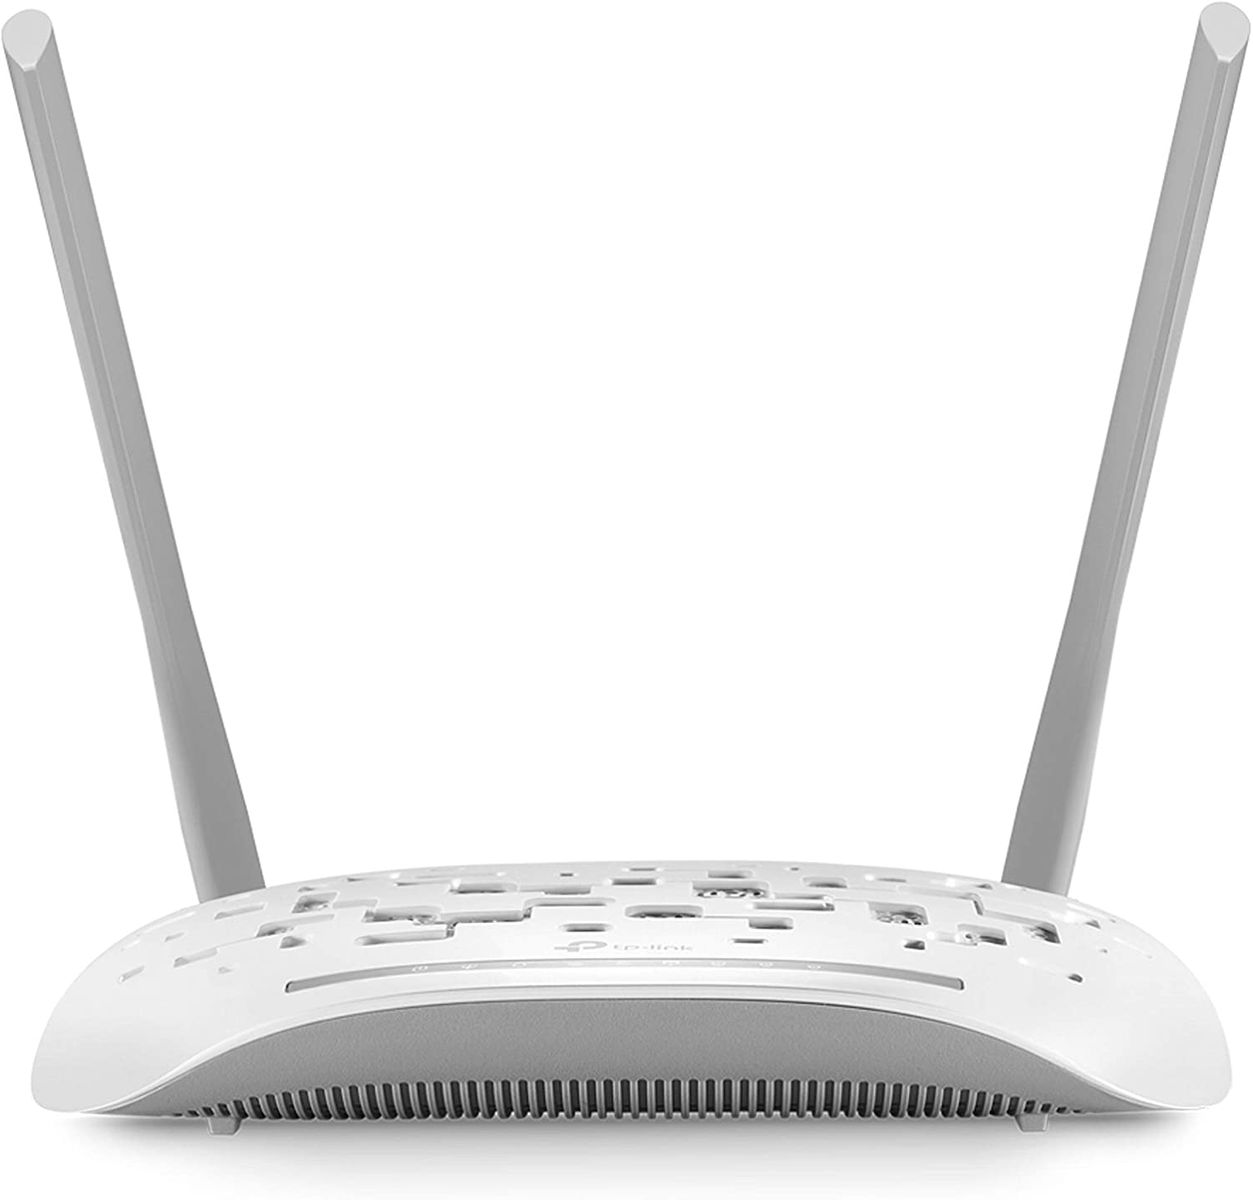 TP-Link TD-W8961N Wireless N Modem Router Access Point ADSL2+ 300 Mbit/s Annex A White v4.0